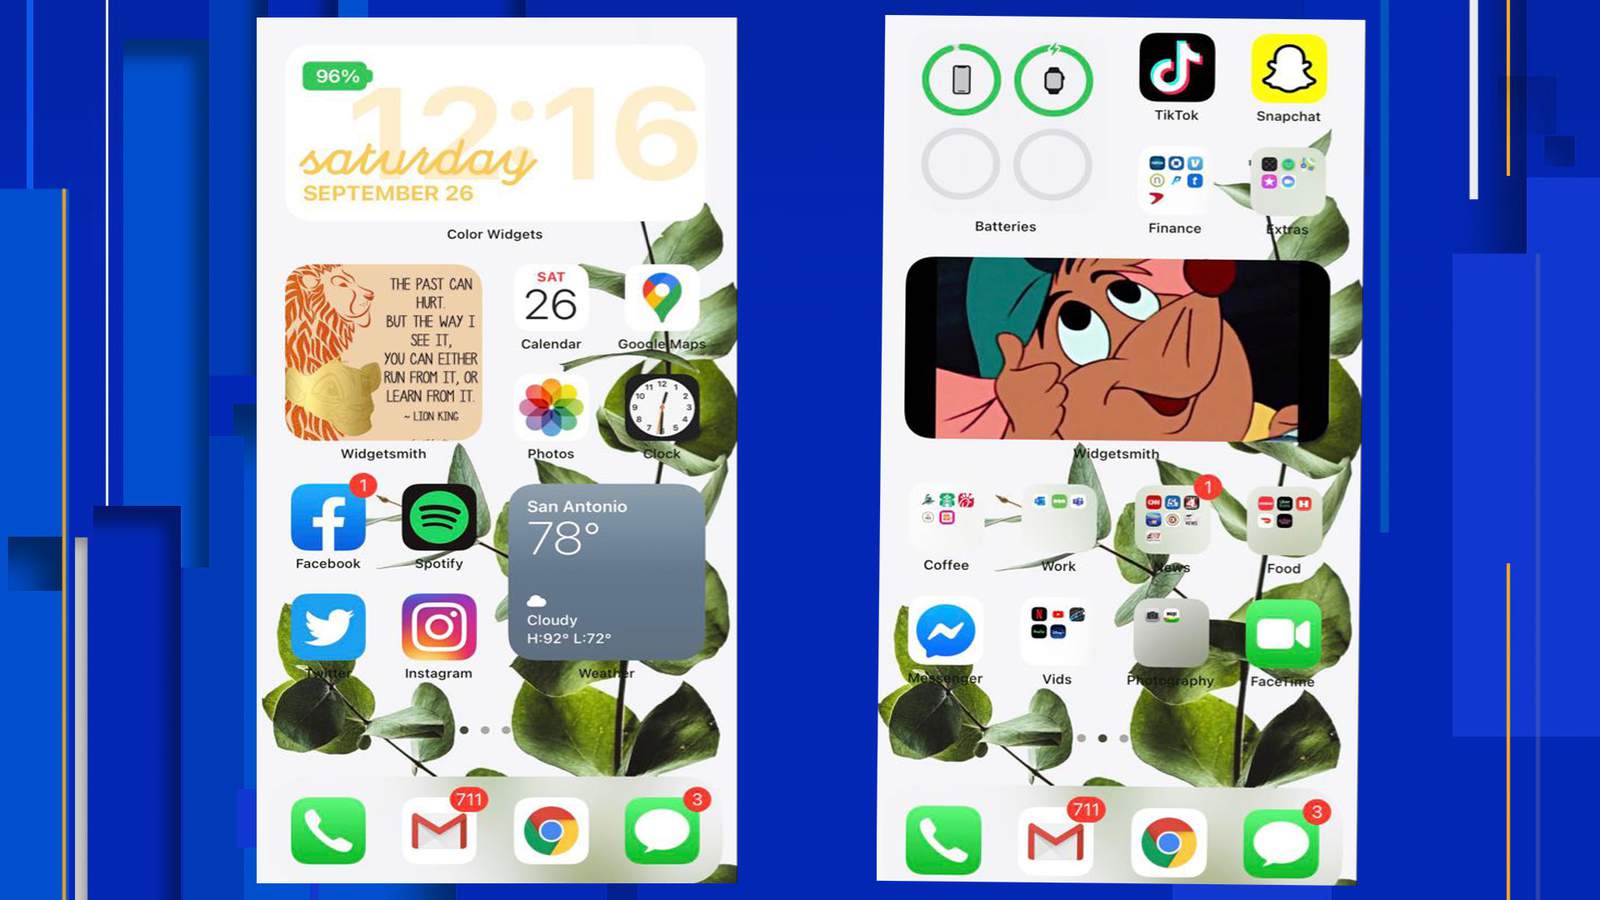 Here’s how to customize your iPhone home screen with widgets, app icons